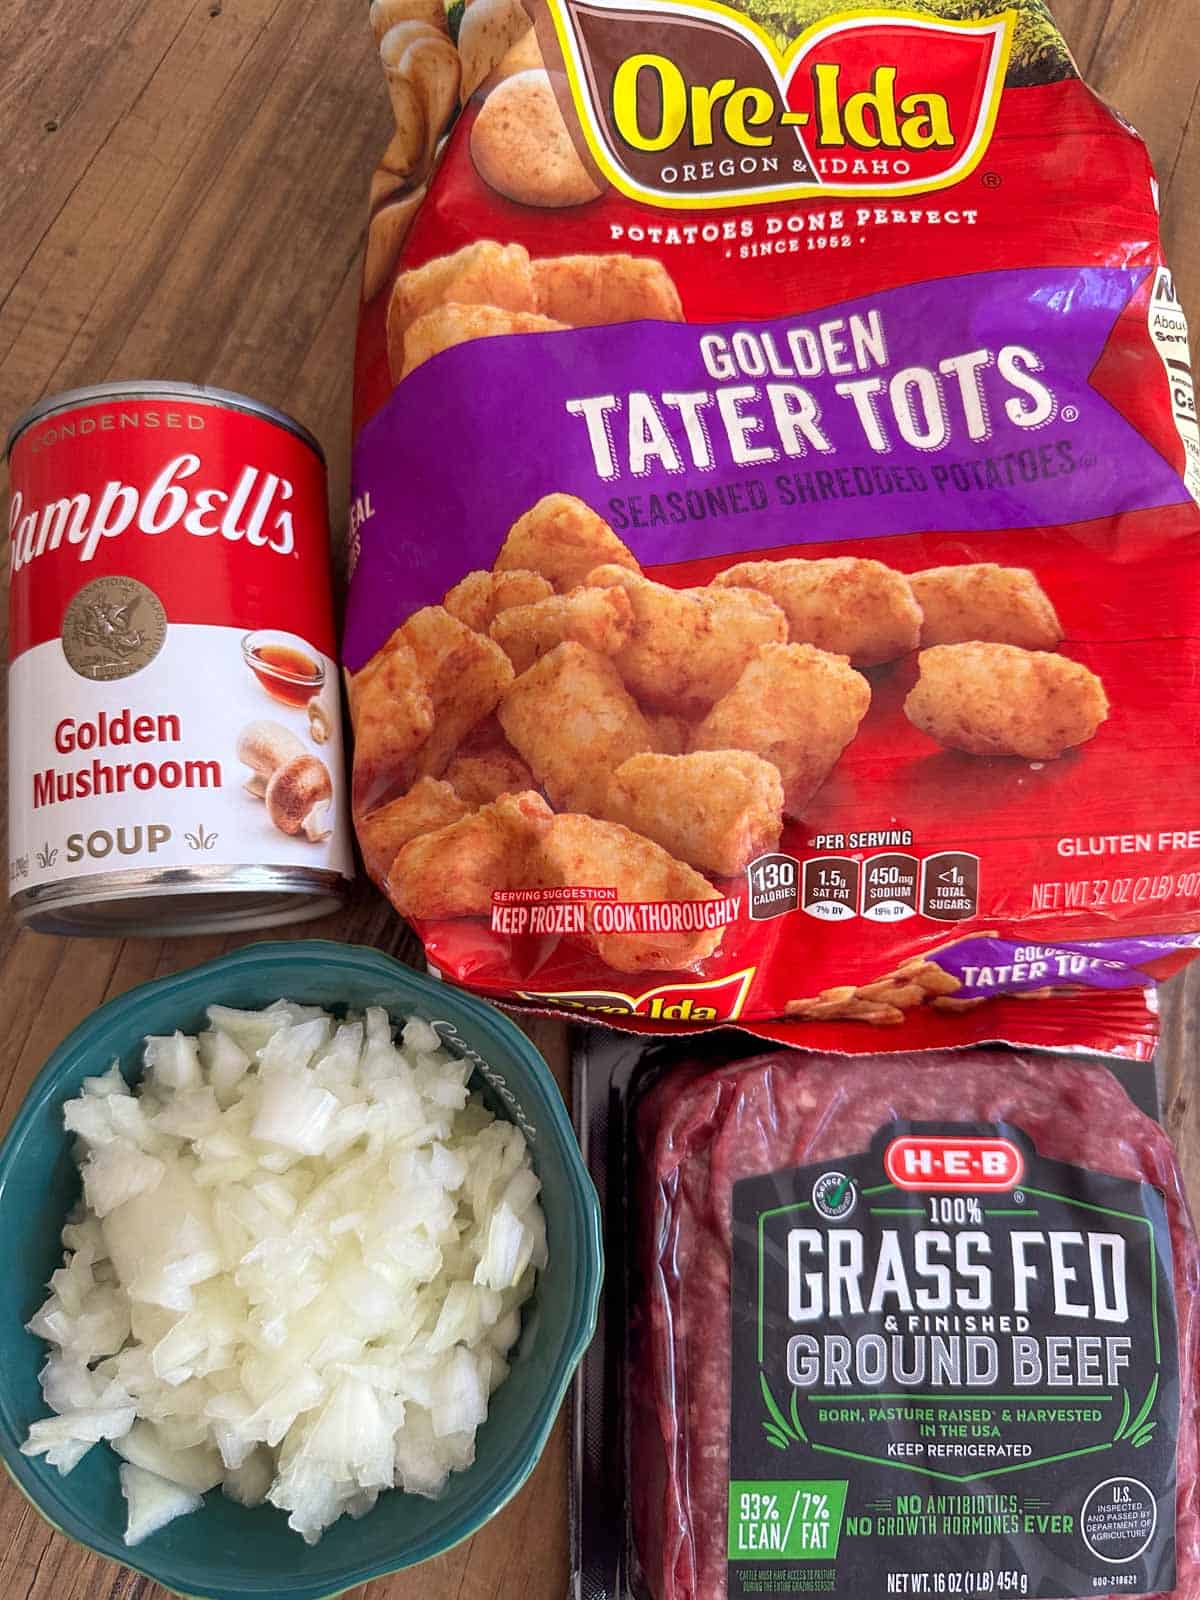 A package of Ore-Ida Golden Tater Tots, a can of Campbell's Golden Mushroom Soup, a bowl with diced onion, and a package of grass fed ground beef.